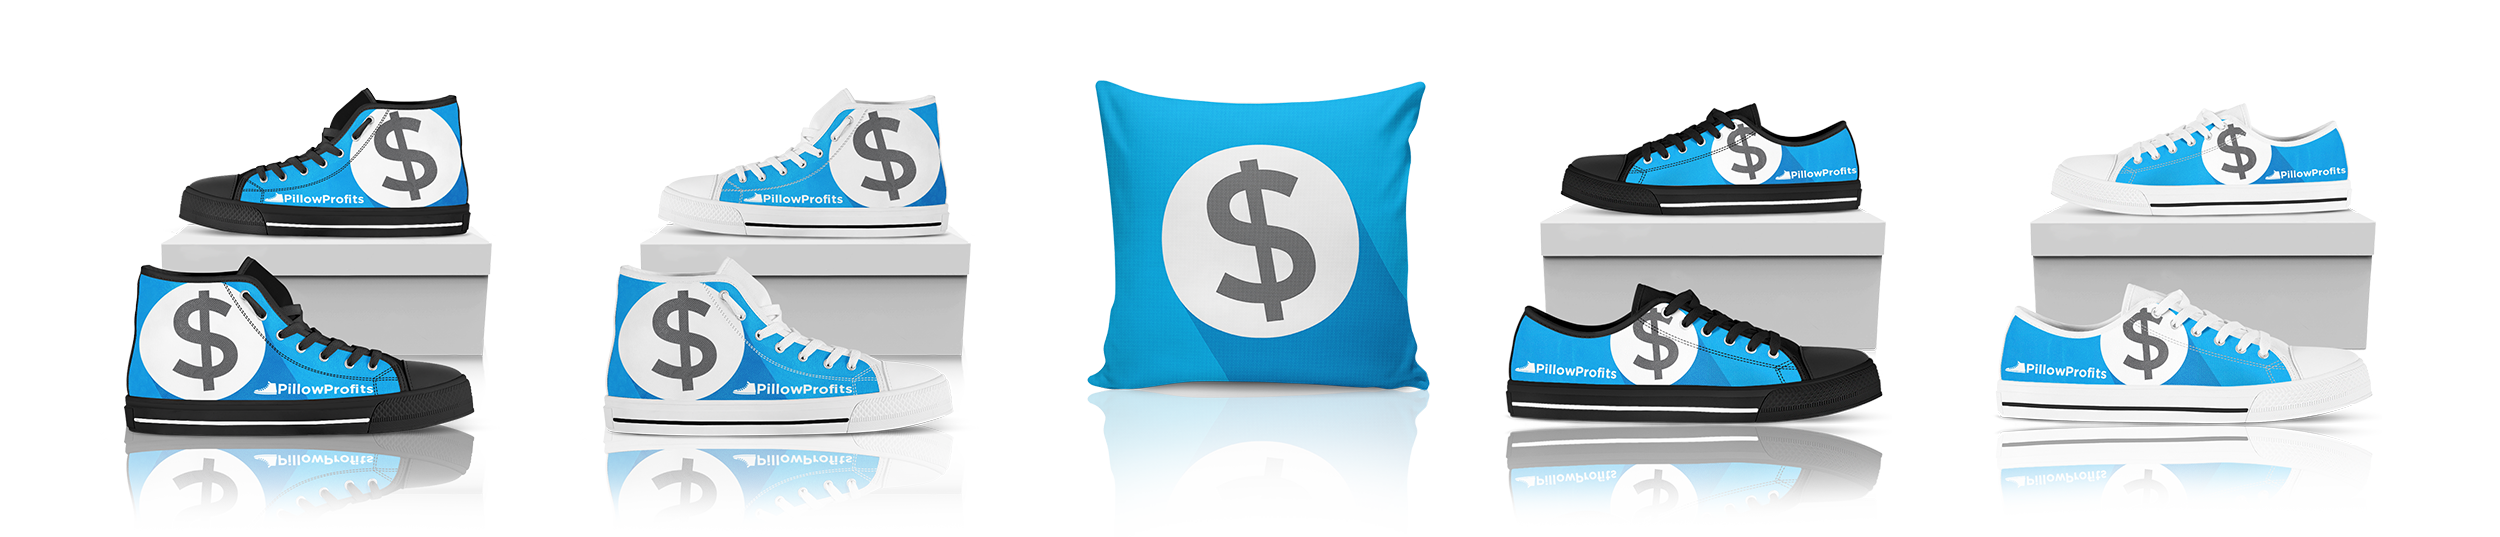 Pillow Profits Knowledge Base | eCommerce Fulfillment Solutions